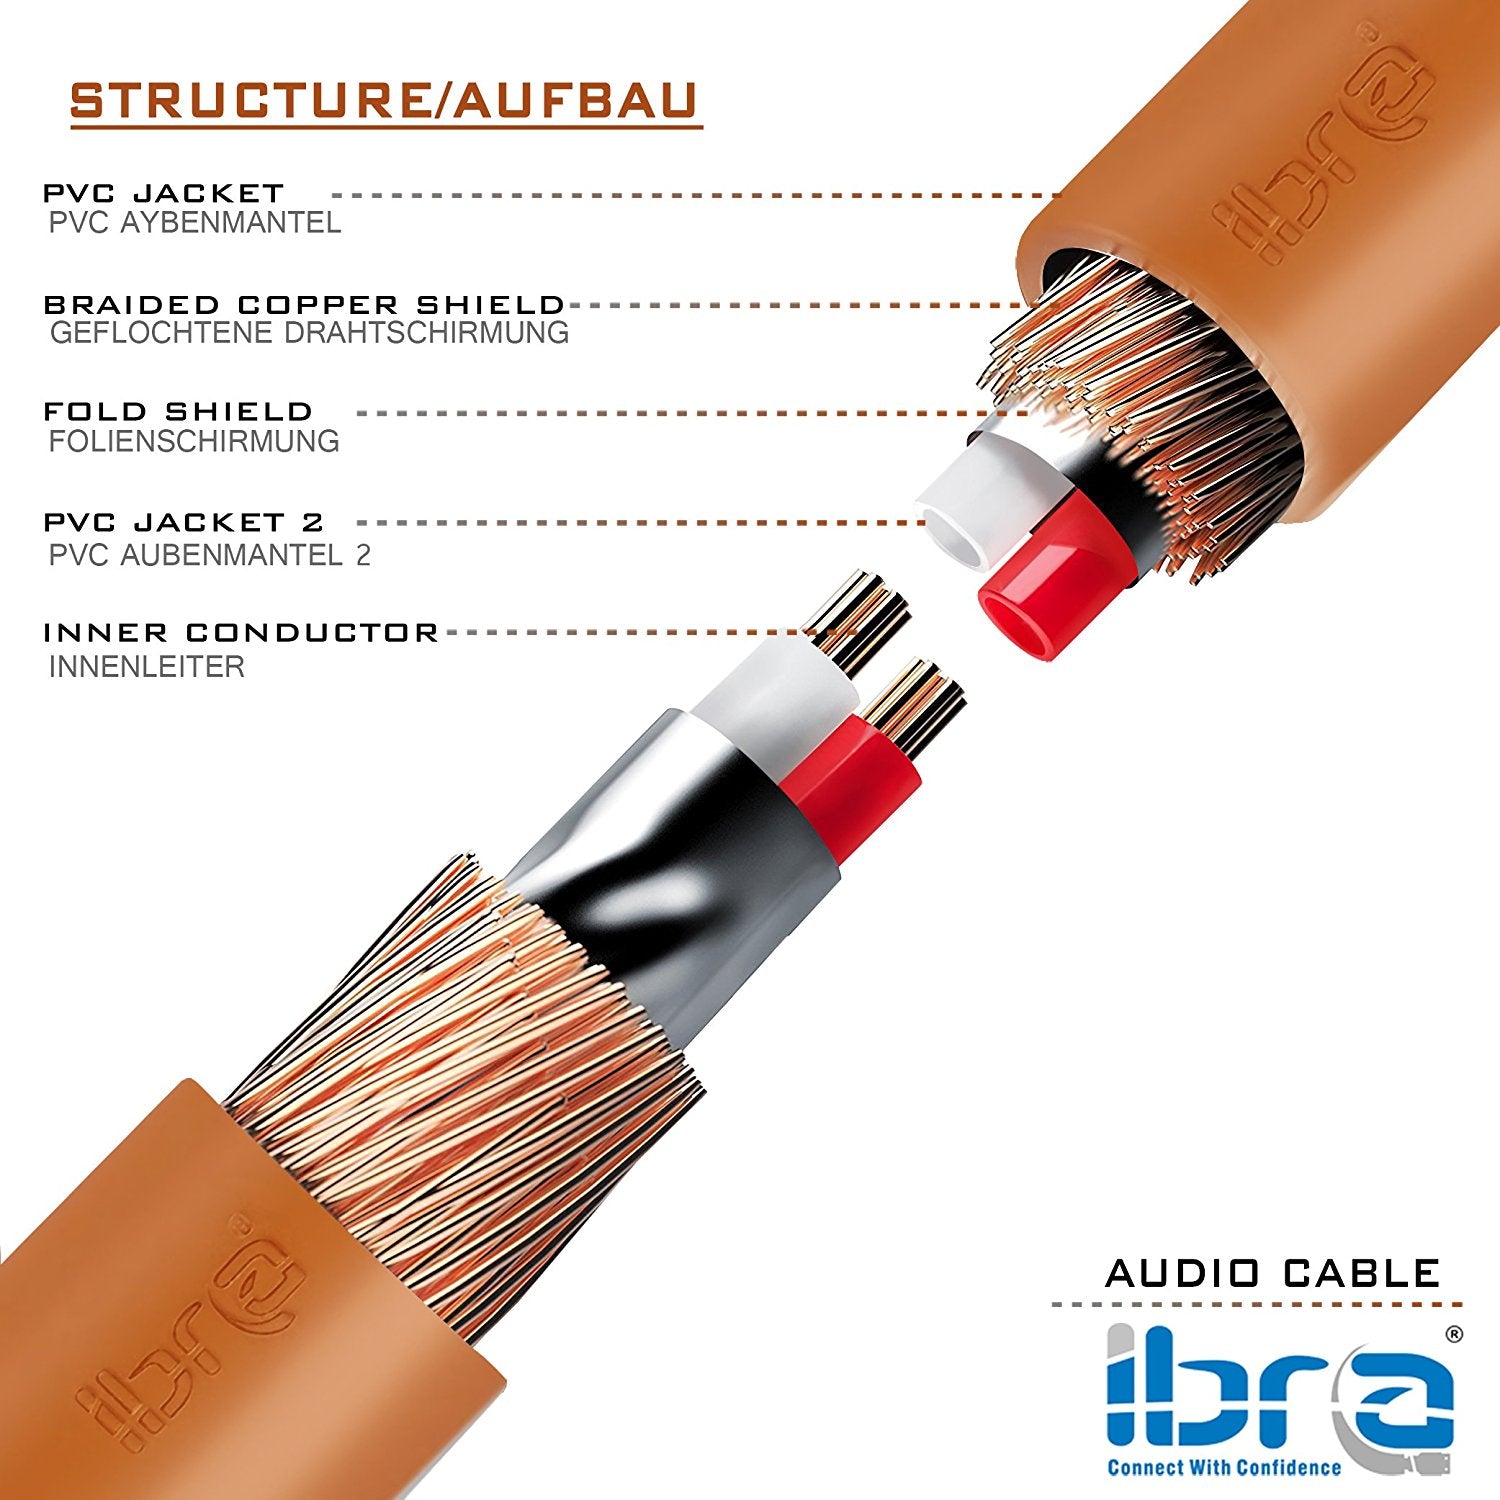 Aux Cable 1.5M 3.5mm Stereo Pro Auxiliary Audio Cable - for Beats Headphones Apple iPod iPhone iPad Samsung LG Smartphone MP3 Player Home / Car etc - IBRA Orange